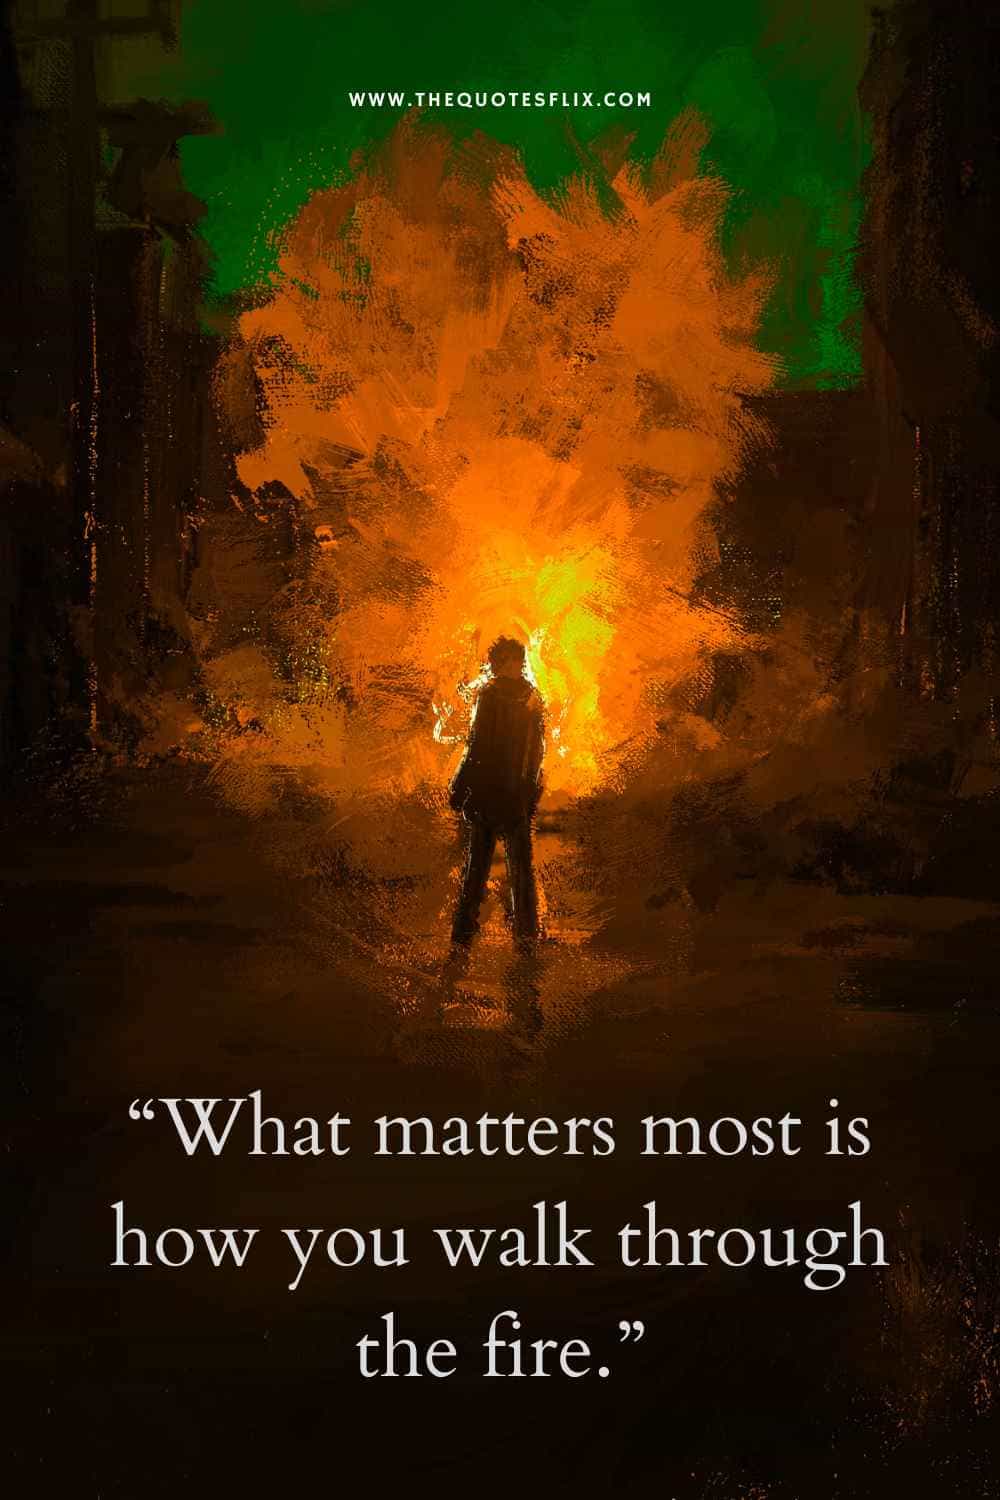 cervical cancer quotes - what matters is how you walk through fire